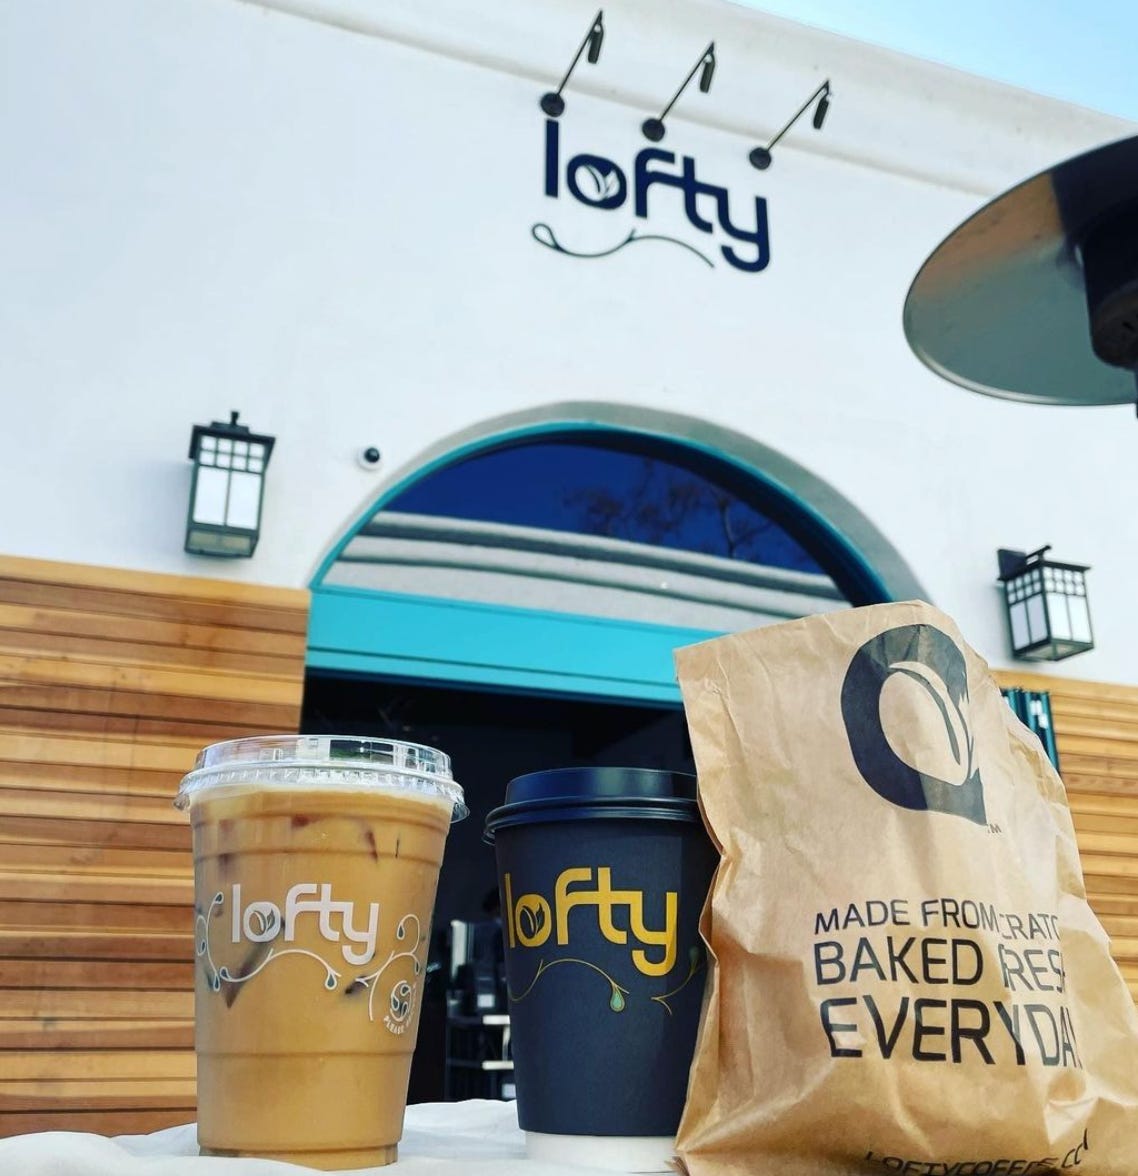 A Lofty Coffee labeled Cold Brew in a clear plastic togo cup, a hot coffee togo and a pastry bag propped up in front of the arched entrance of the Lofty Coffee Shop that has a wood lower wall, white washed top half and the Lofty Logo above the arch.